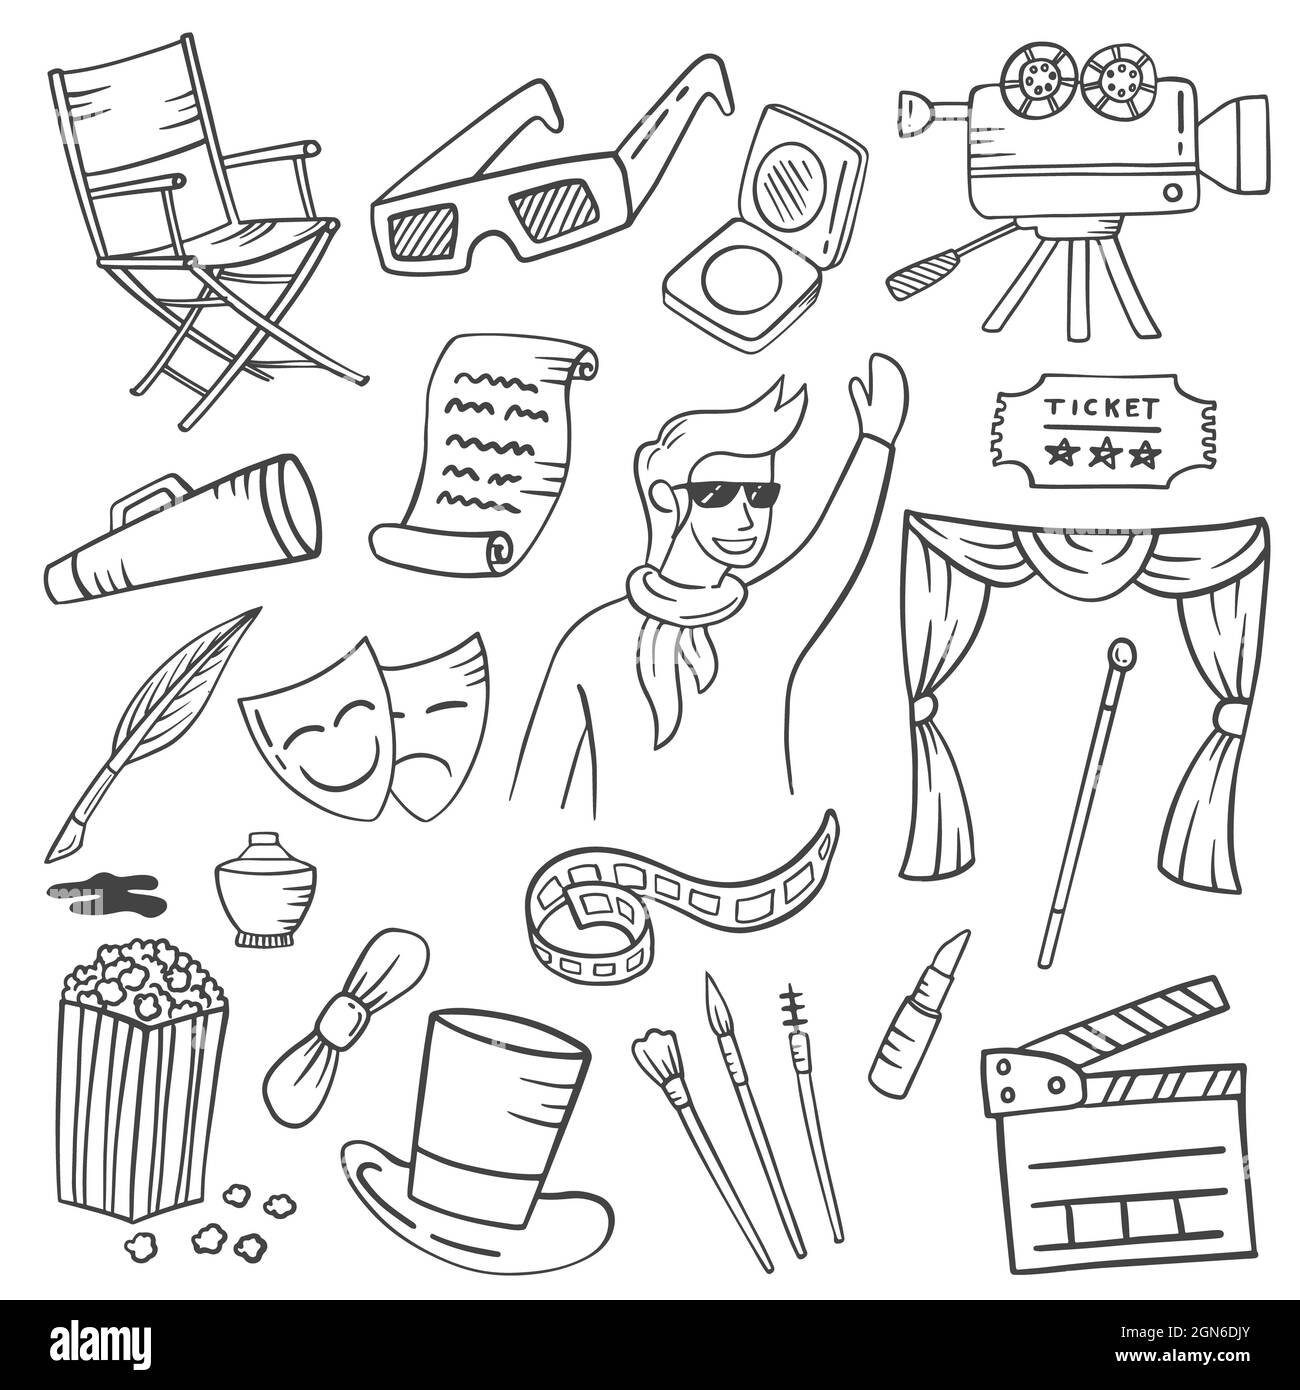 actor or artist jobs or profession doodle hand drawn set collections with outline black and white style vector illustration Stock Photo